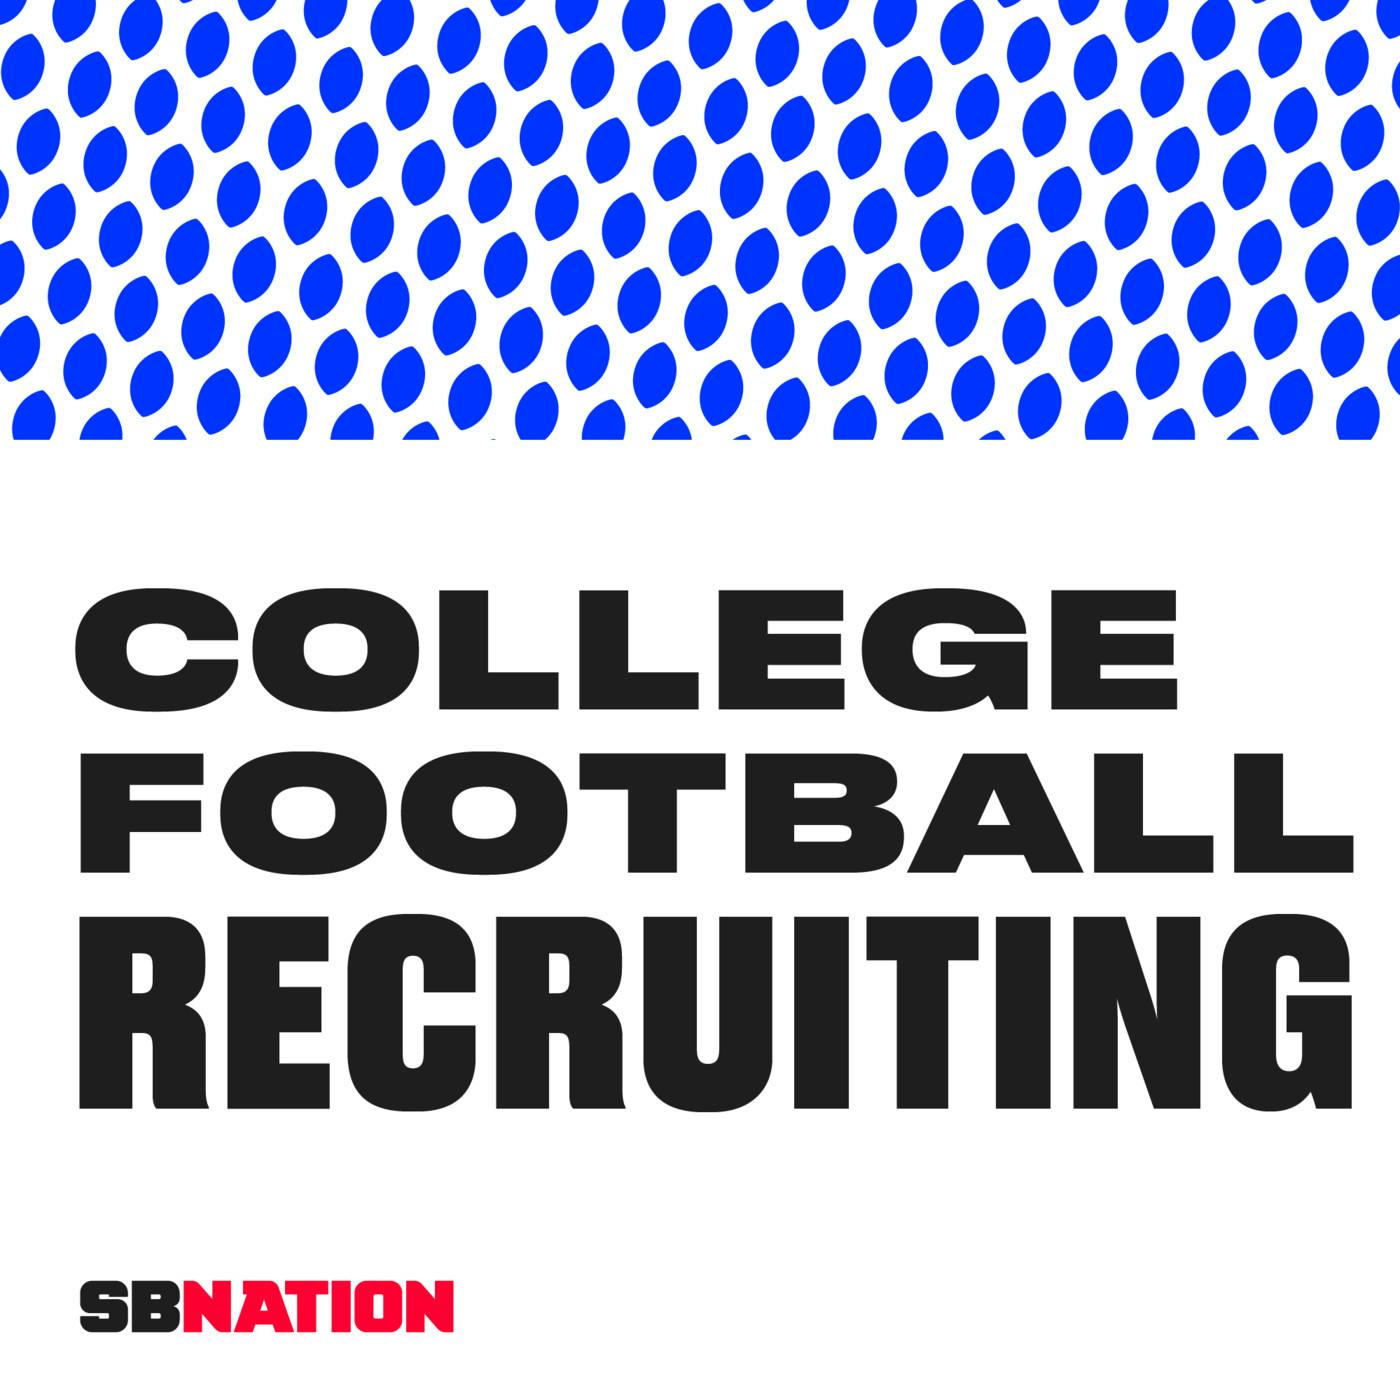 The new recruiting overachievers